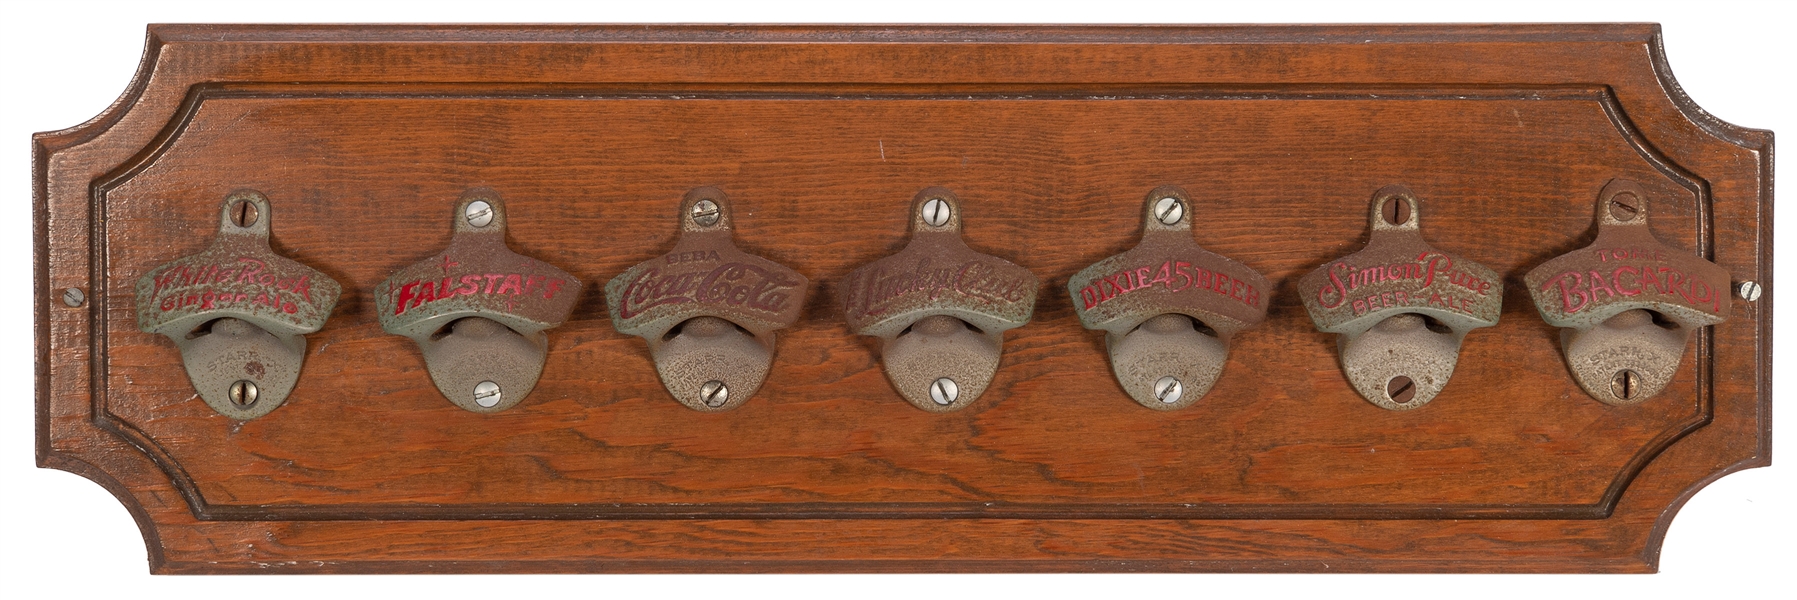  Group of 7 Starr Advertising Bottle Openers. Display of 7 o...